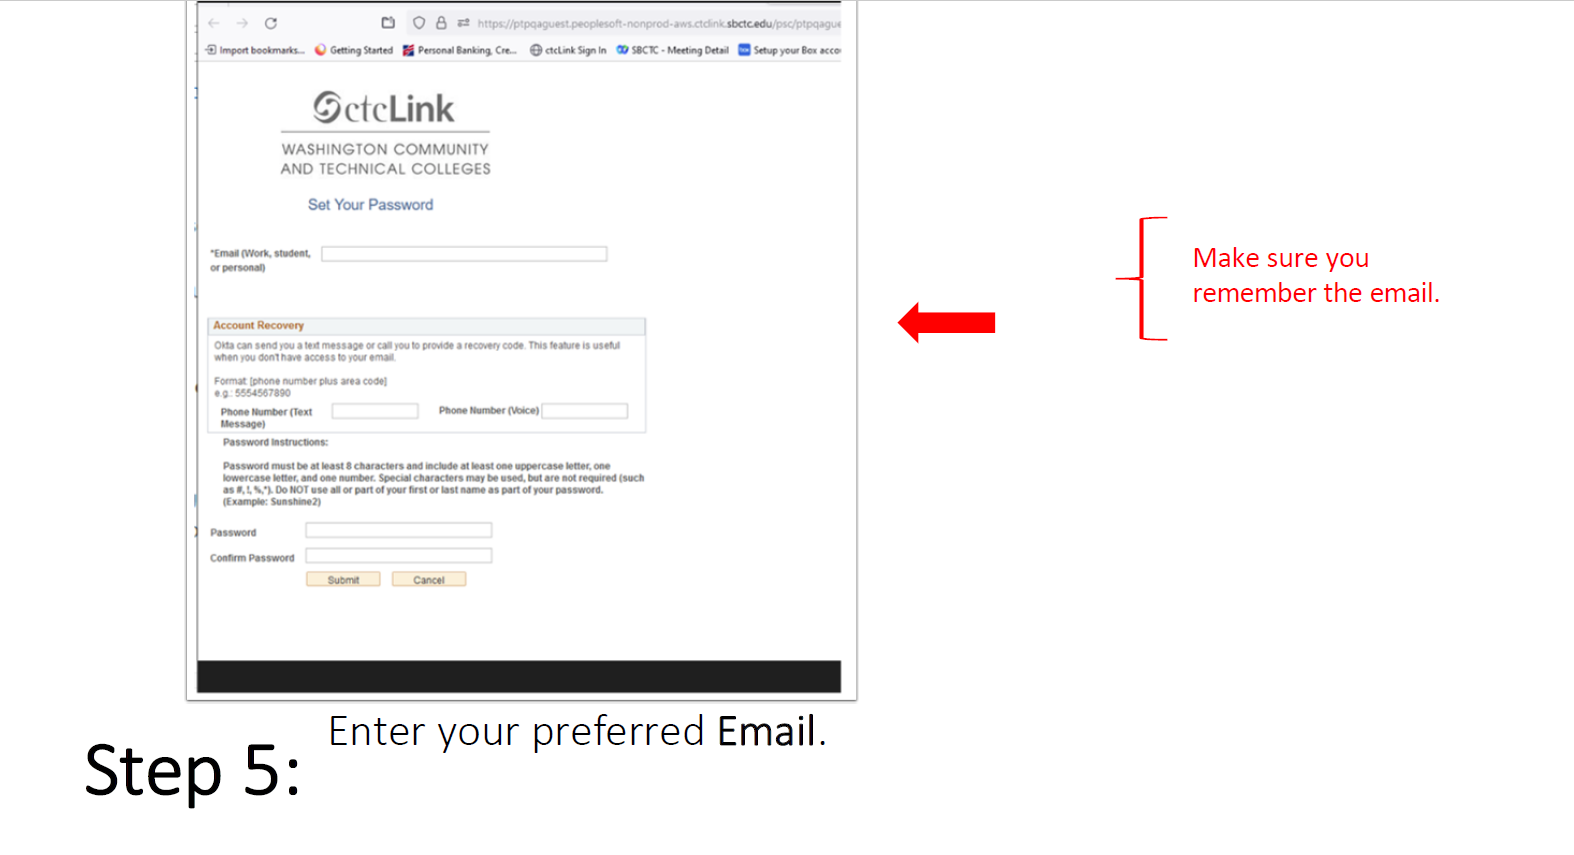 Step 5: Enter your preferred Email. Make sure you remember that email. Write it down if needed.